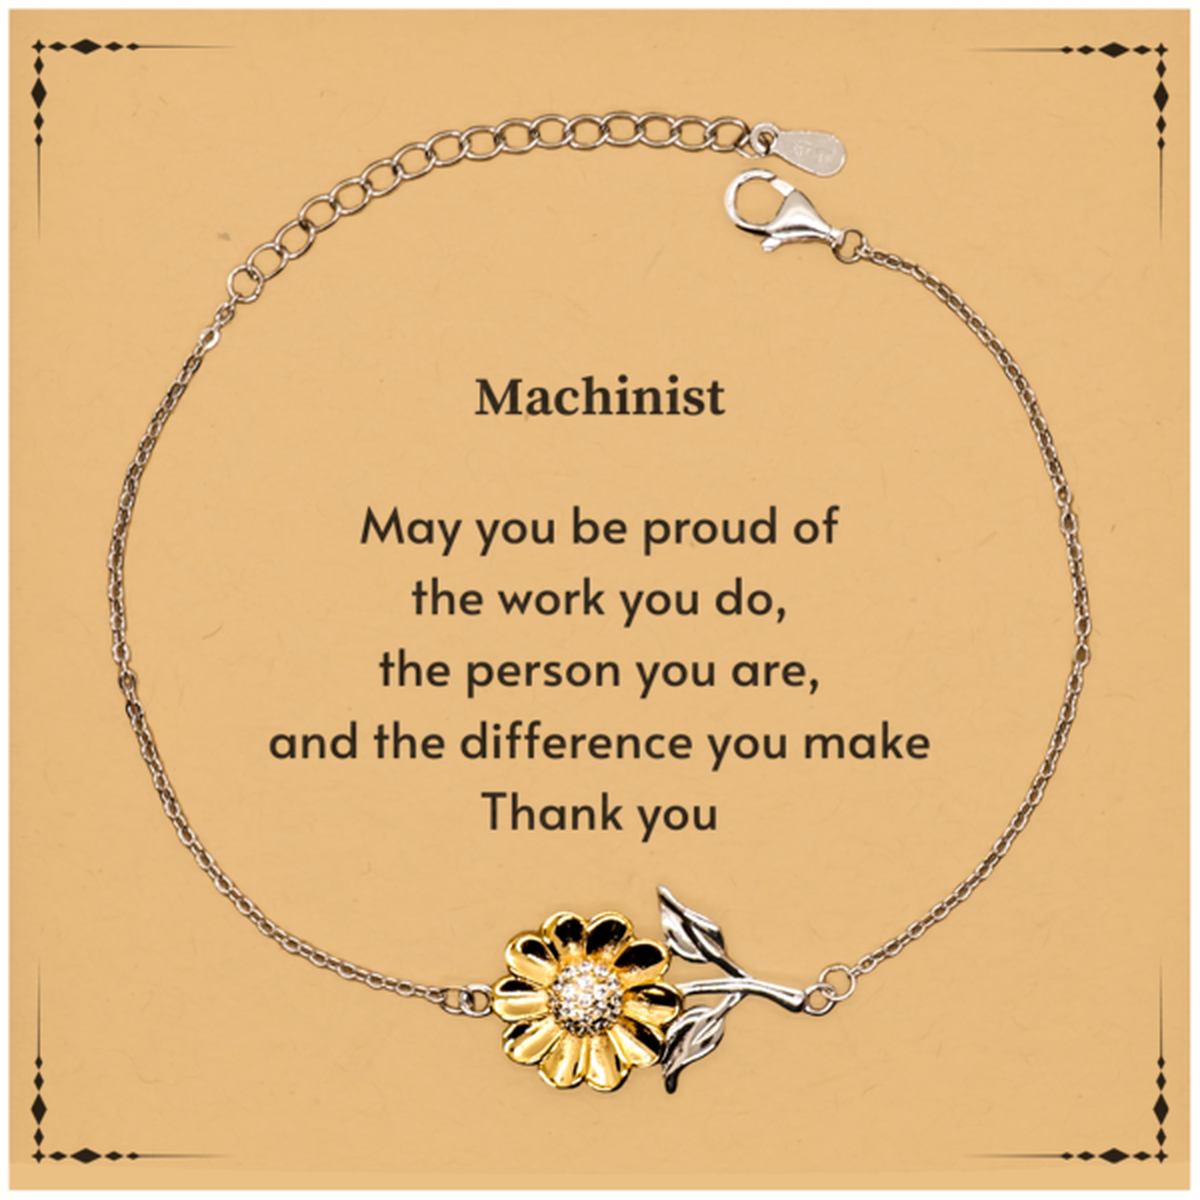 Heartwarming Sunflower Bracelet Retirement Coworkers Gifts for Machinist, Machinist May You be proud of the work you do, the person you are Gifts for Boss Men Women Friends